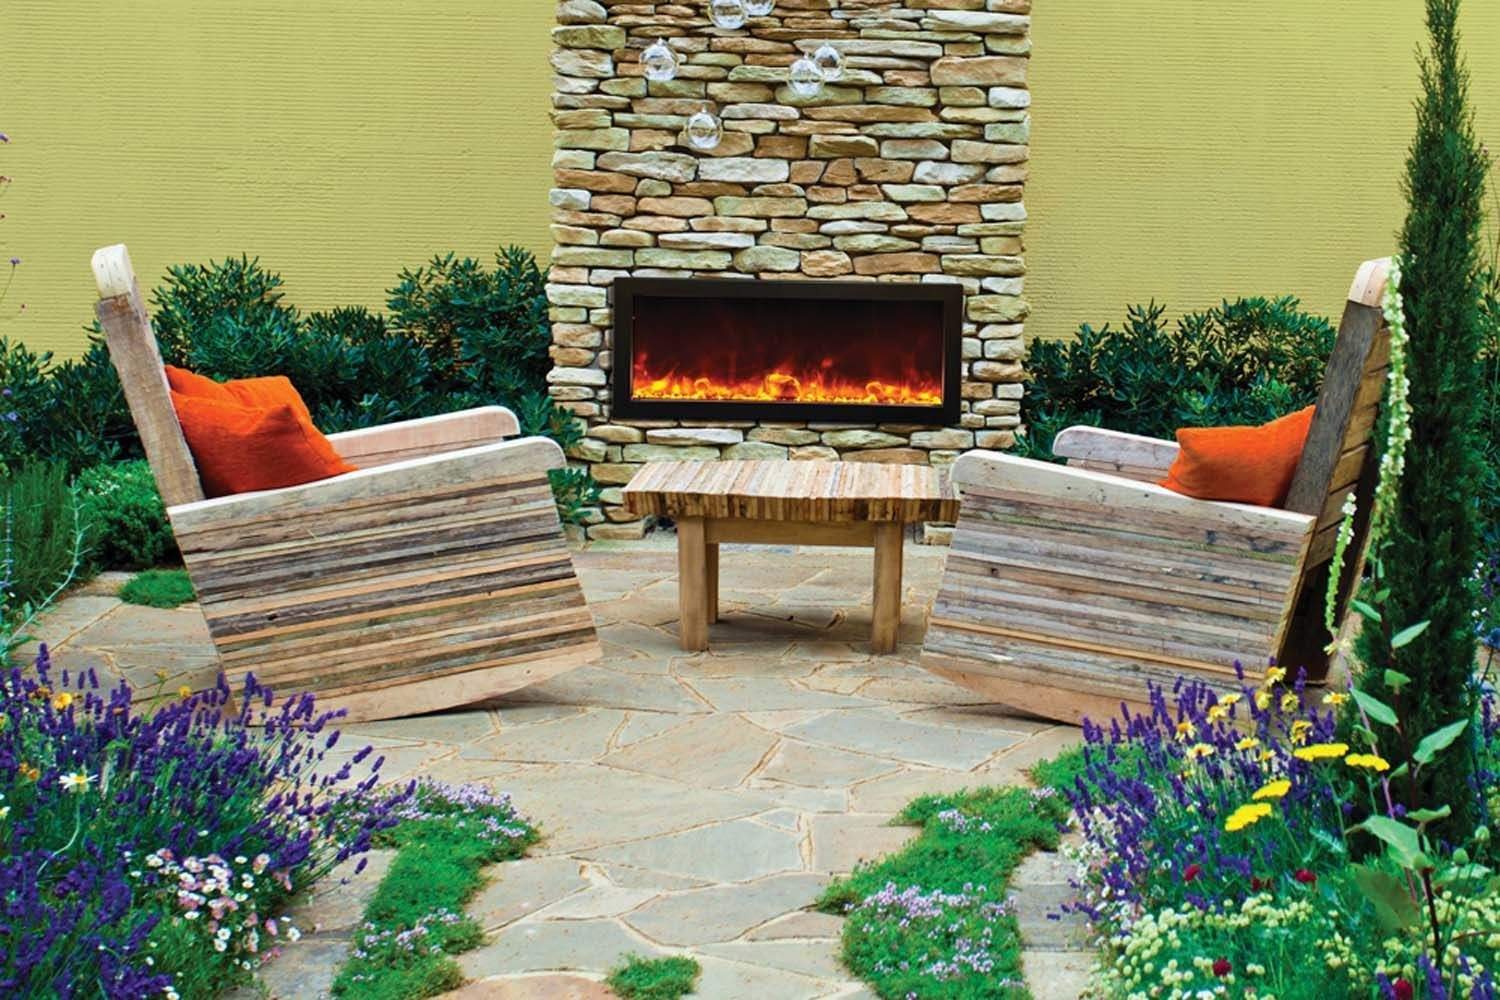 Real Flame aspen Electric Fireplace New Amantii Bi 40 Slim Od Outdoor Panorama Series Slim Electric Fireplace 40 Inch